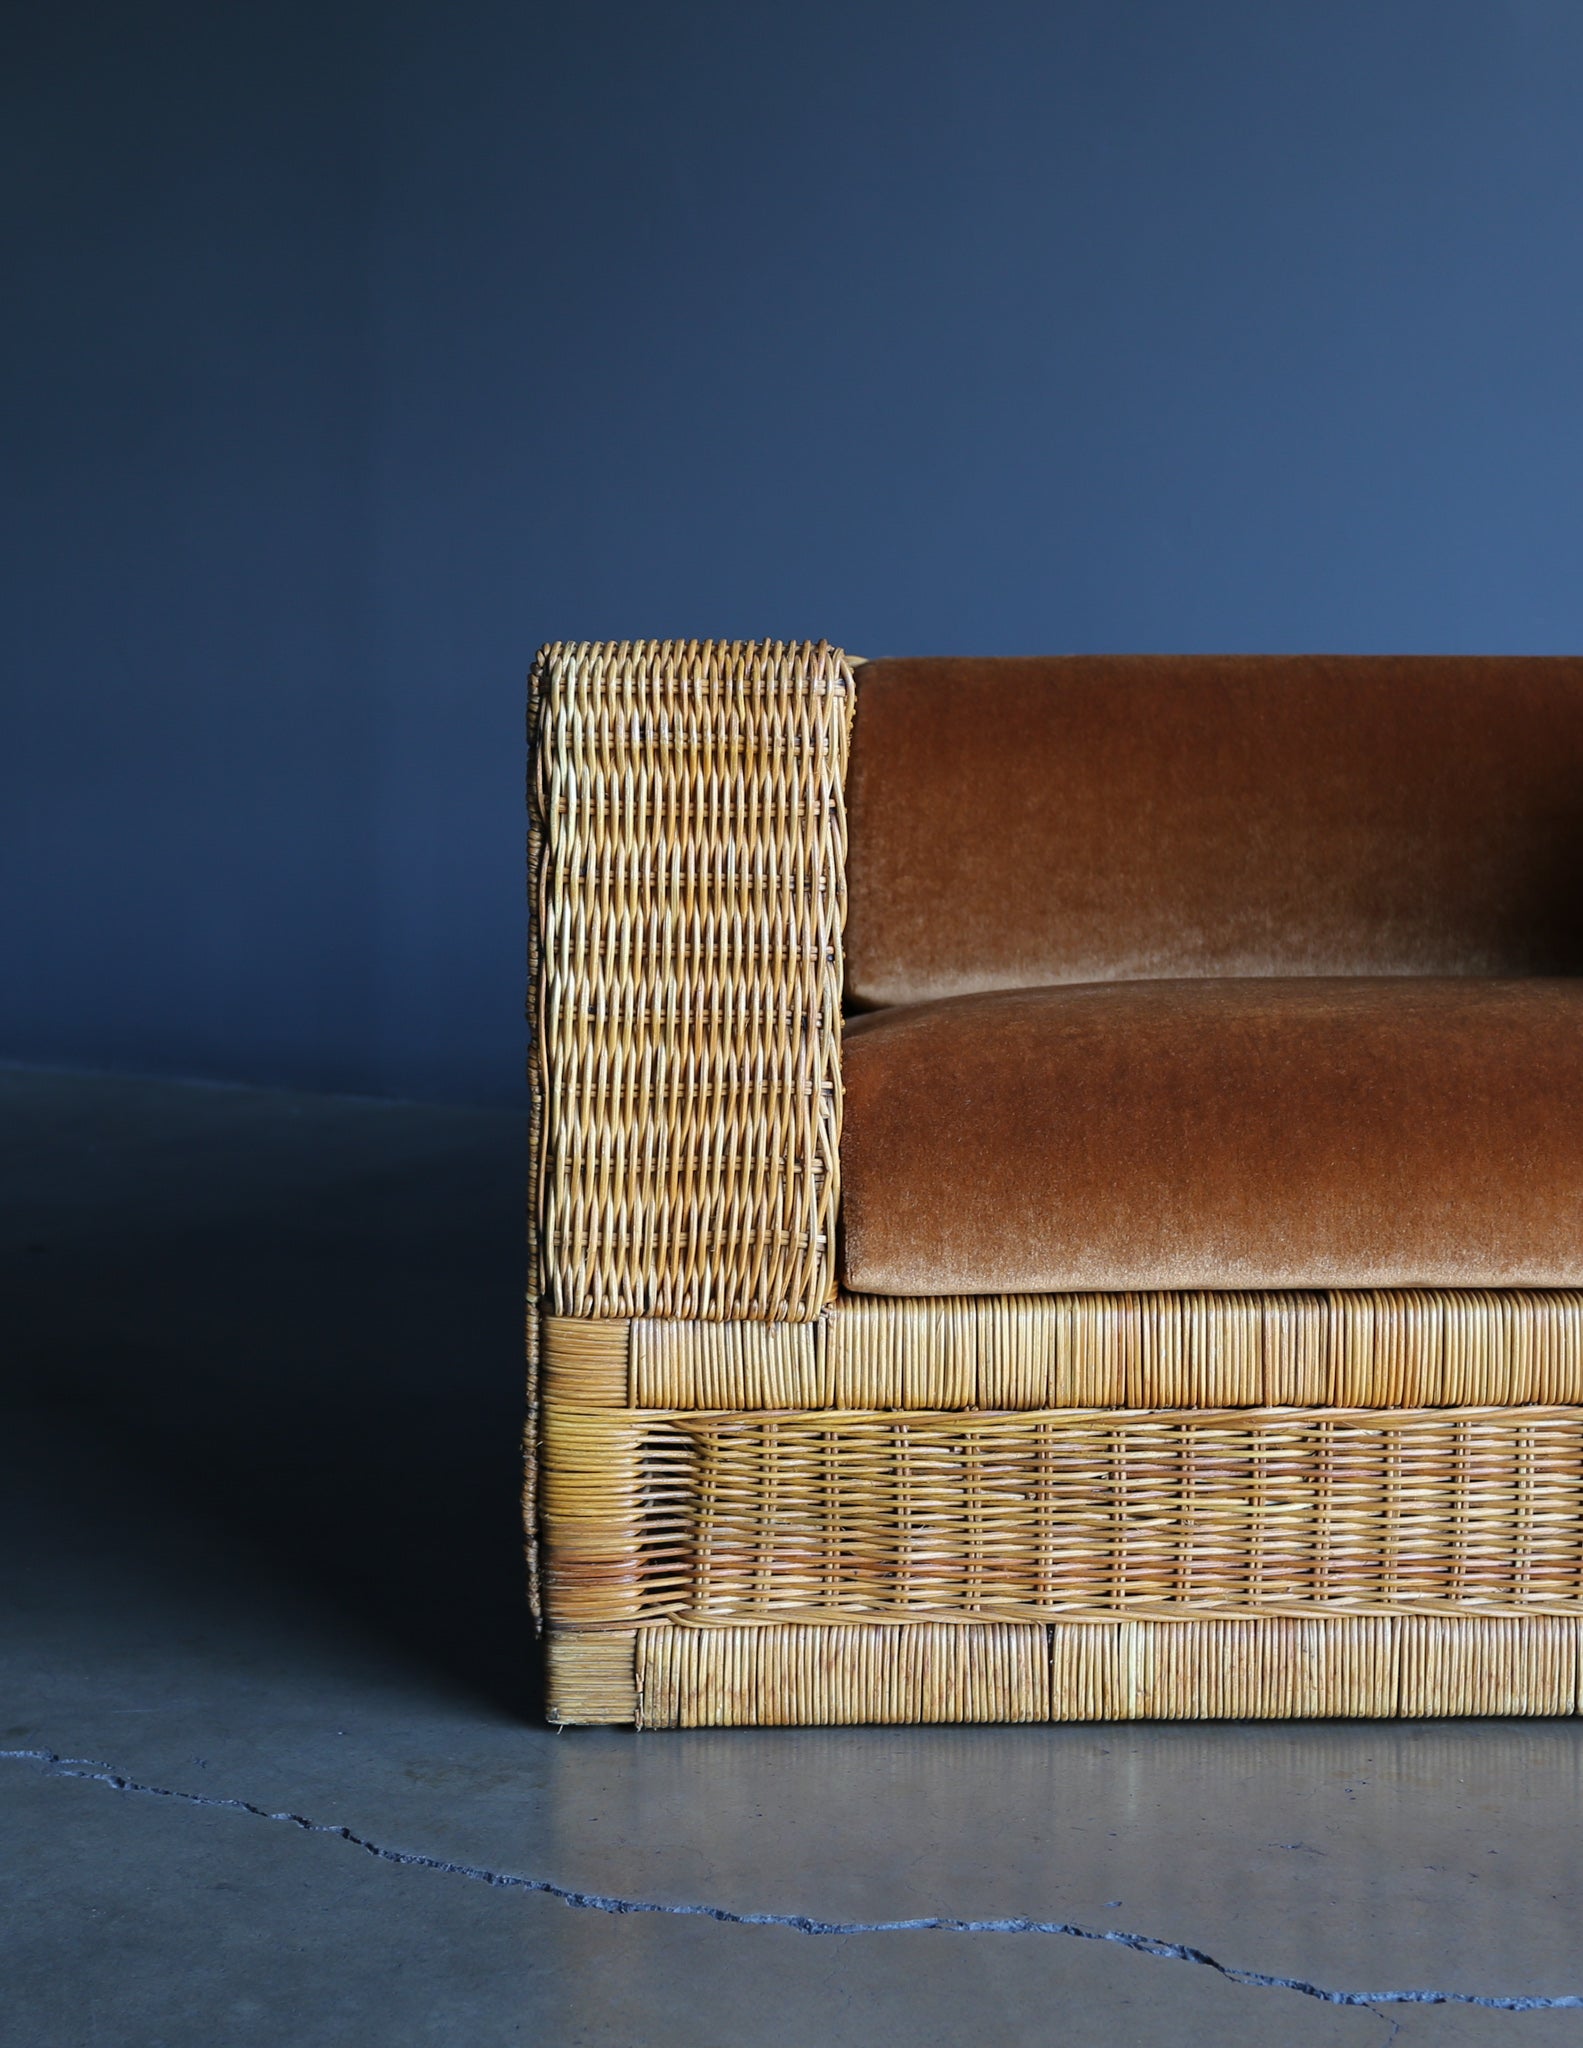 = SOLD = Large Scale Modernist Wicker & Mohair Lounge Chairs, circa 1965